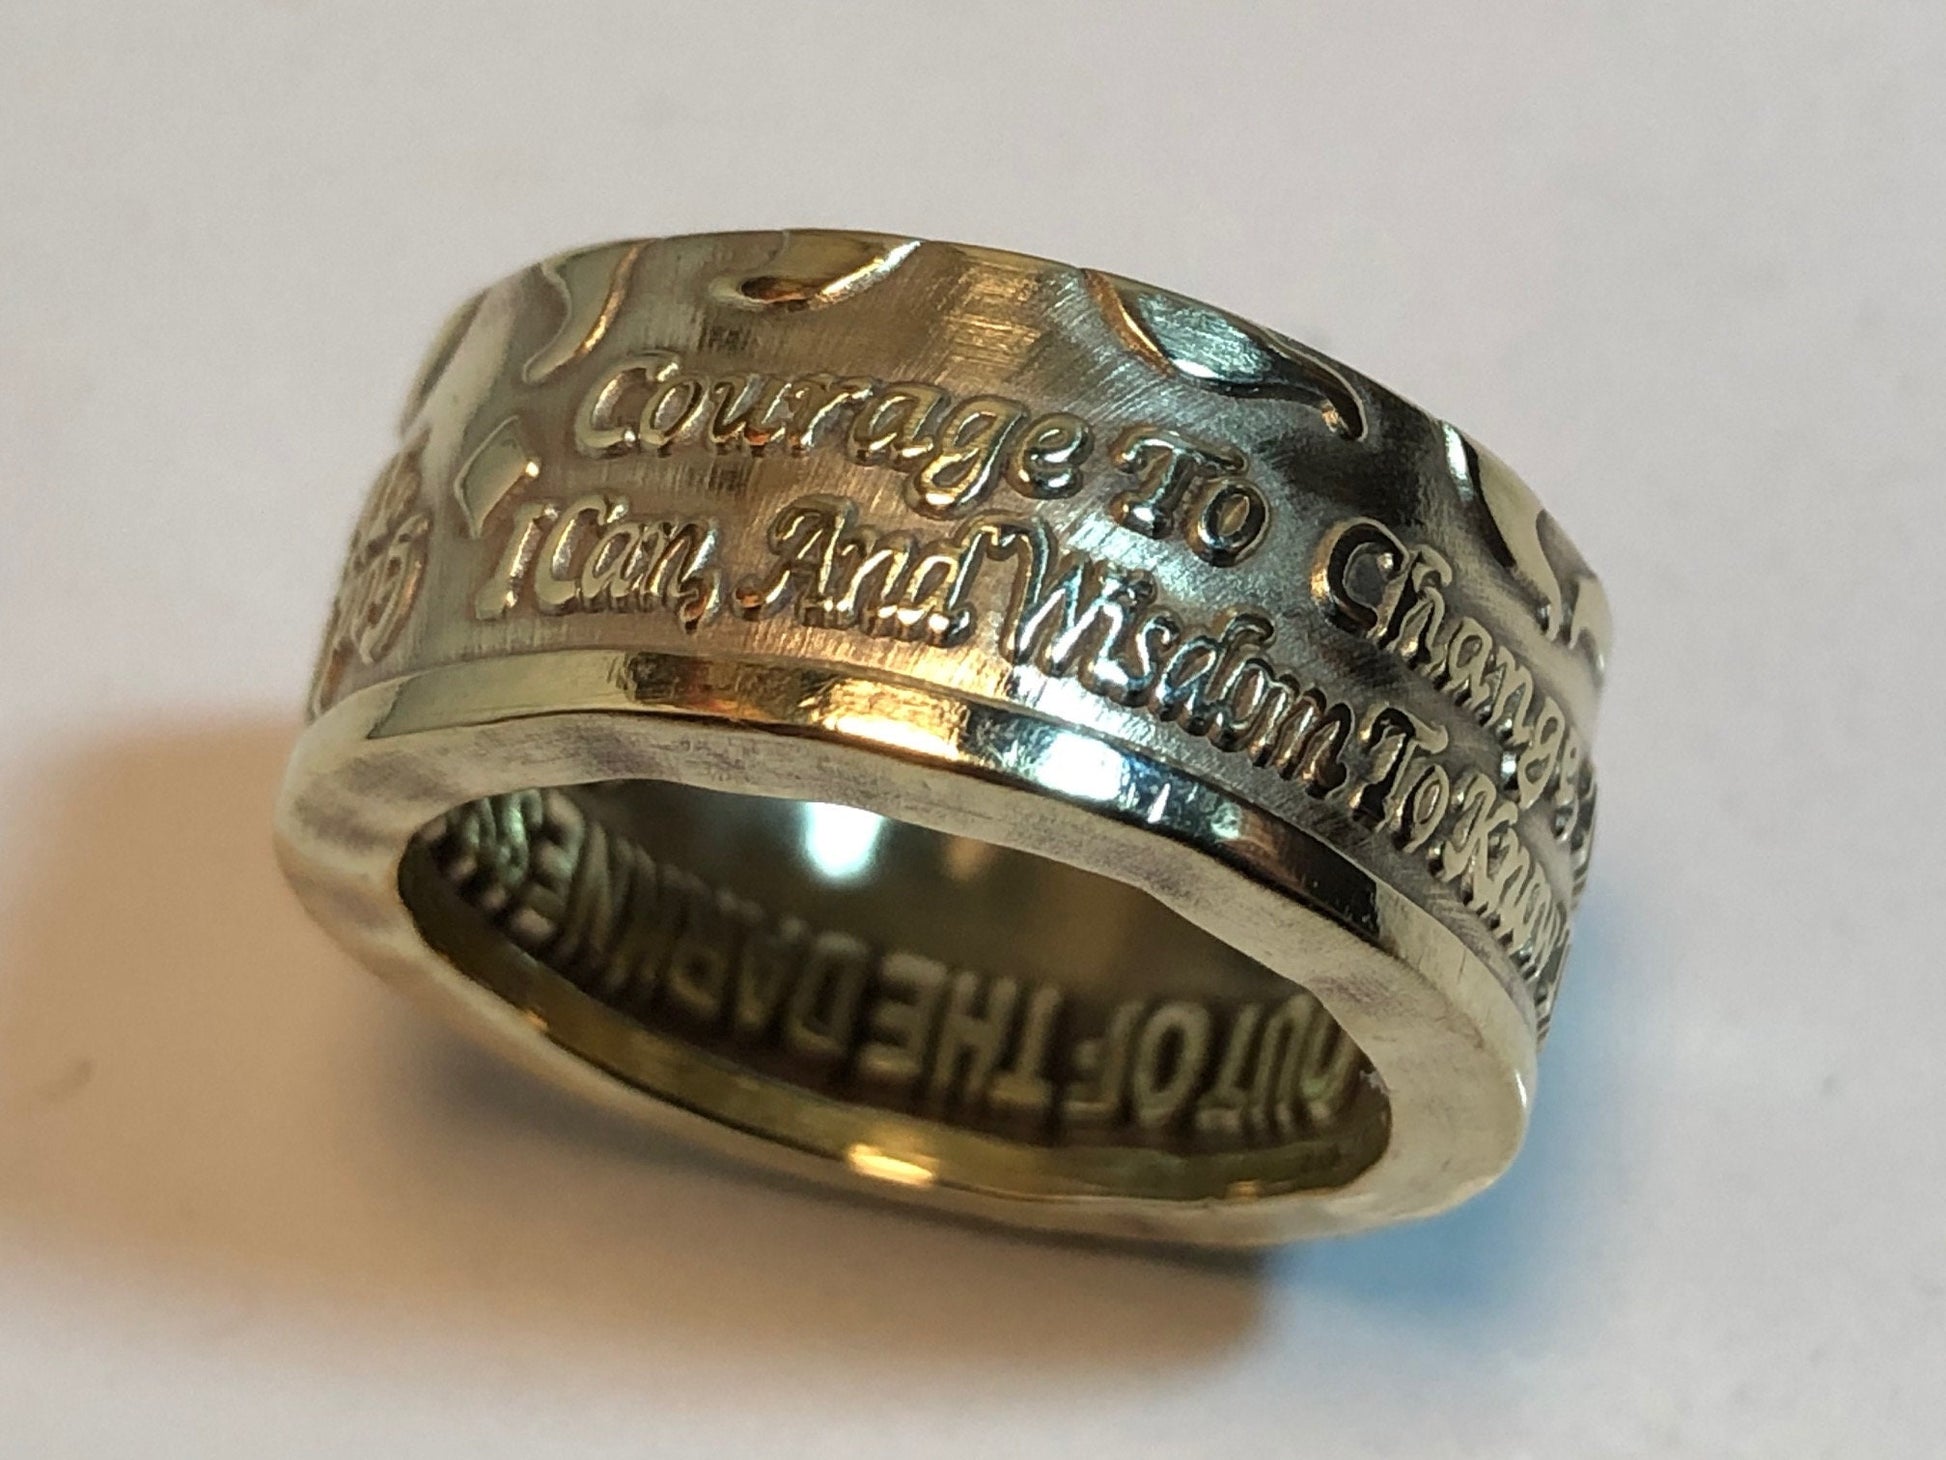 Addiction Coin Ring Ladies Serenity Prayer Drugs Alcohol Abuse Sober Recovery Ring Personal Jewelry Ring Gift Friend Ring Gift For Her Him